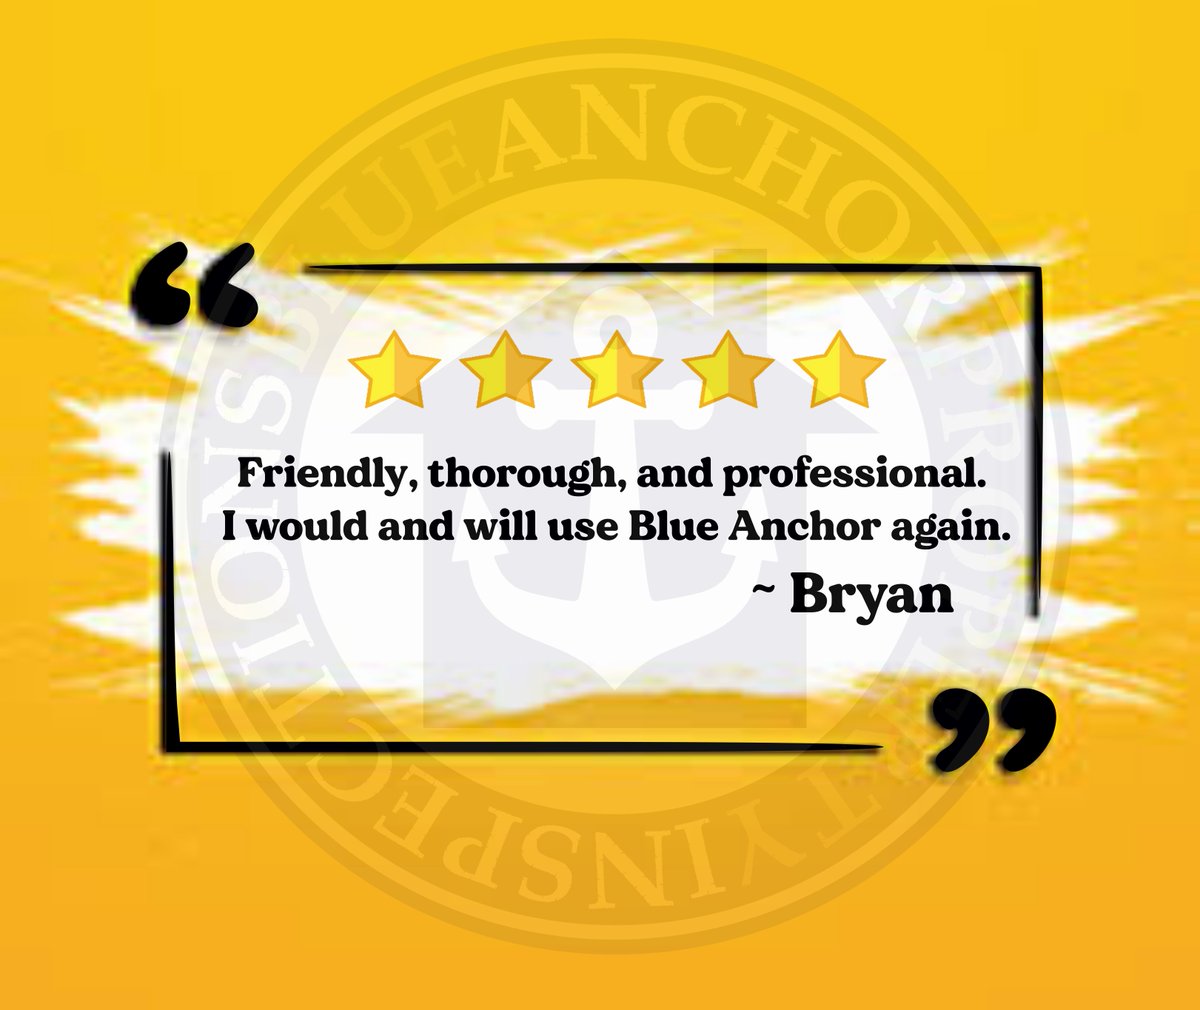 #TestimonialTuesday Happy to help home buyers through the process. There's a perfect house for everyone. #HappyHouseHunting #homeinspectorlife